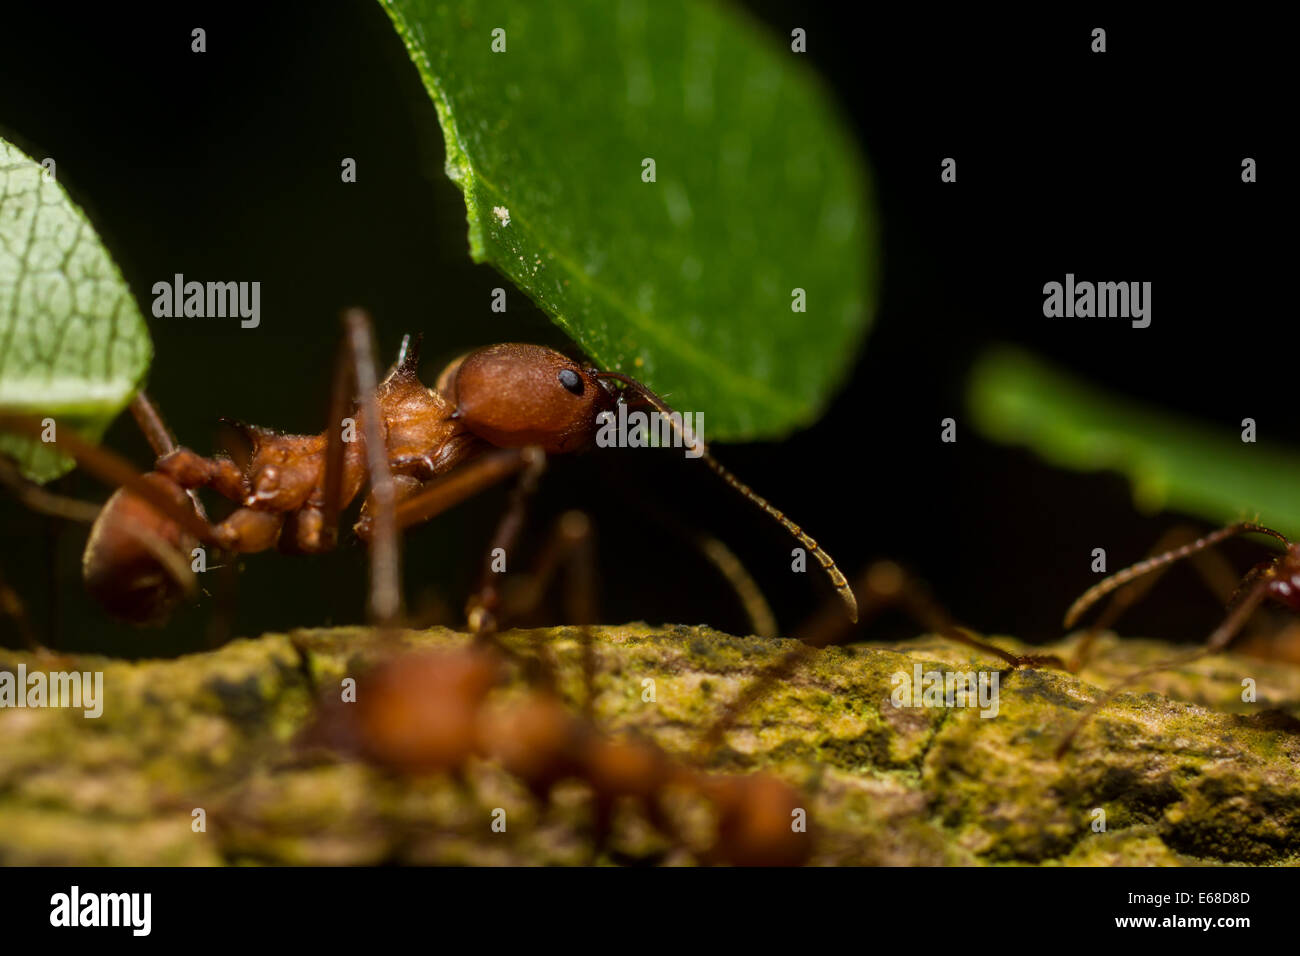 Leaf cutter Ant Atta genus, carrying vegetation back to its colony where they will use this to cultivate a fungus. Stock Photo